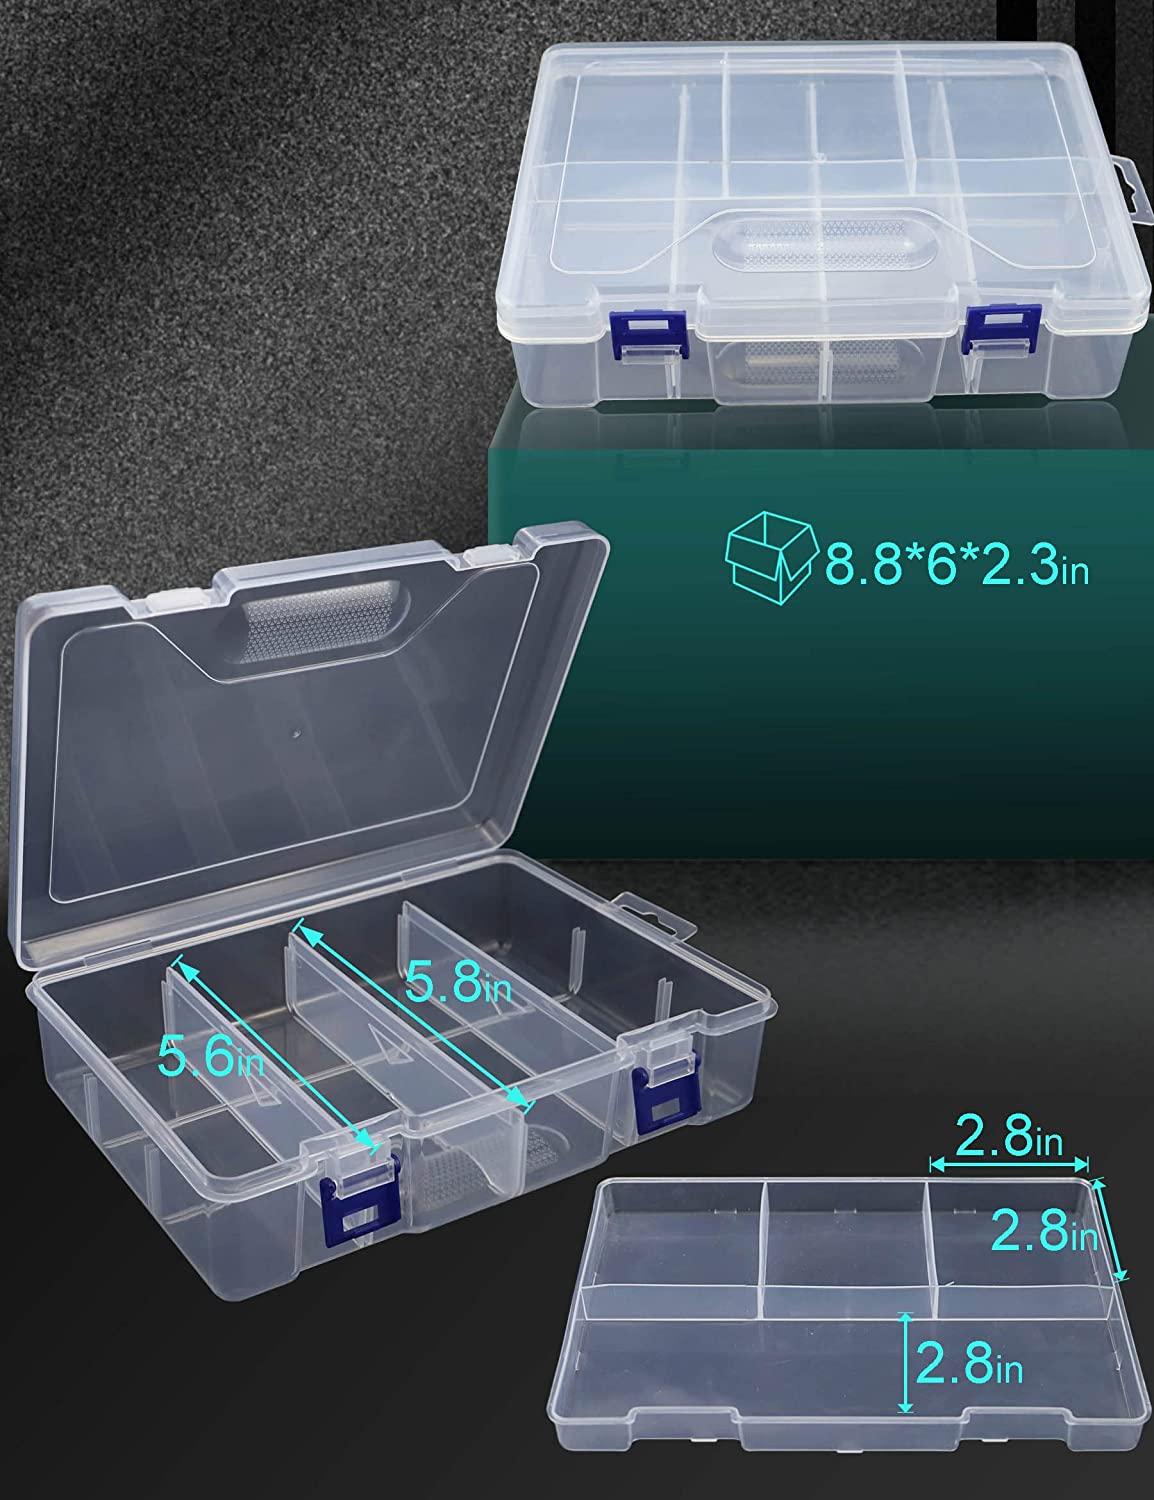  2pcs Tackle Box Organizer Plastic Boxes Fishing two-tier  StowAway utility box Storage with Removable Dividers : Sports & Outdoors